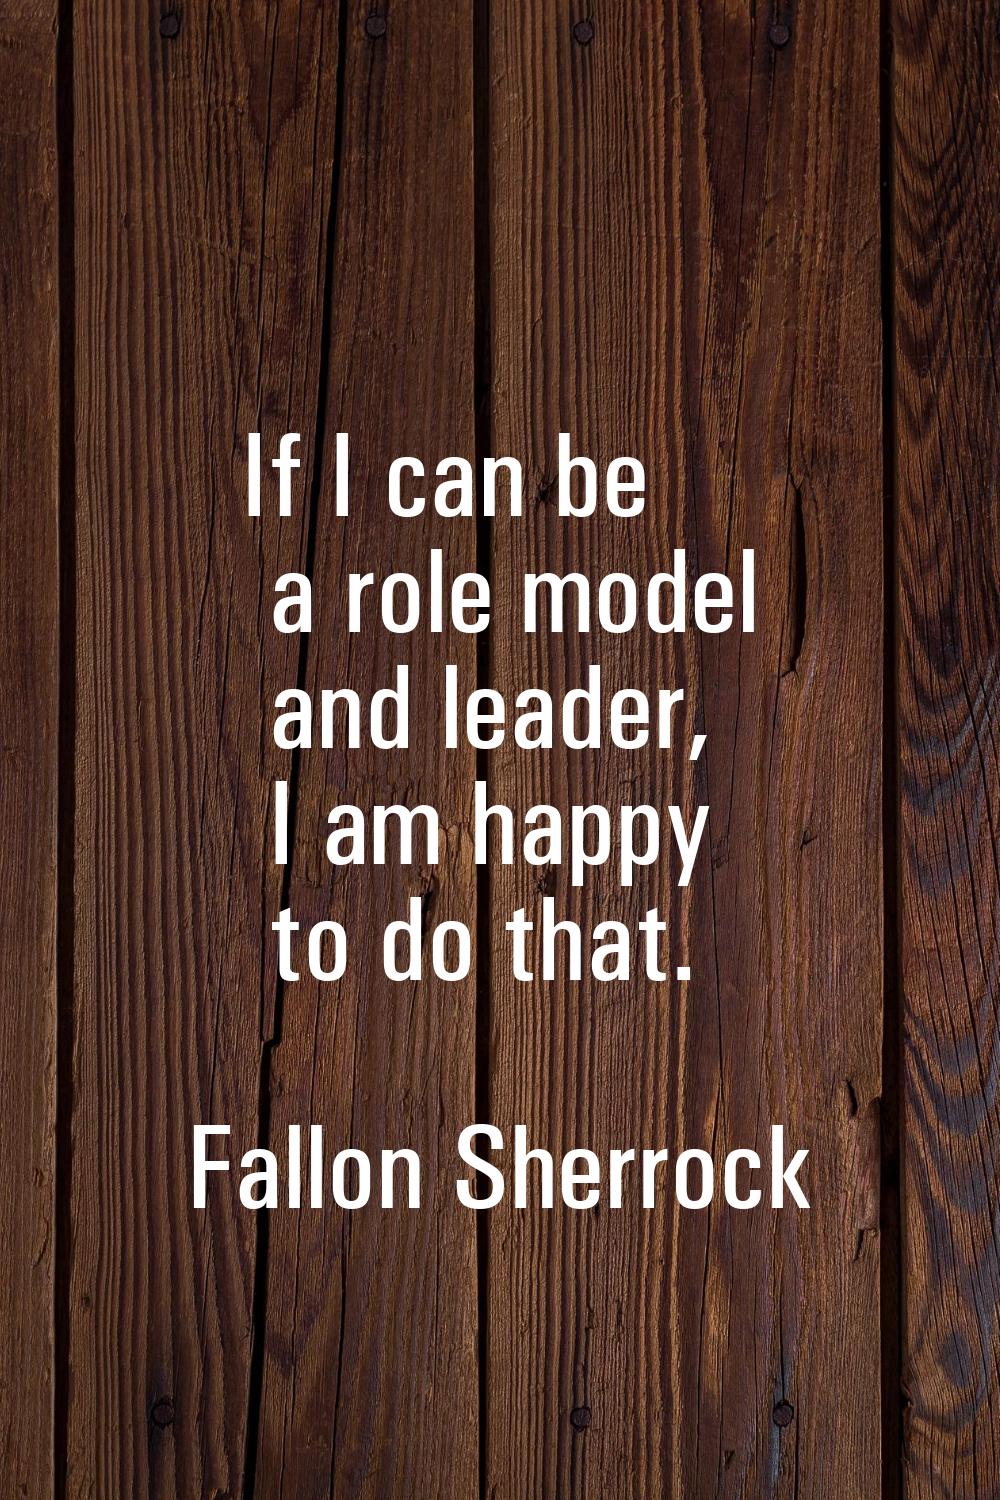 If I can be a role model and leader, I am happy to do that.